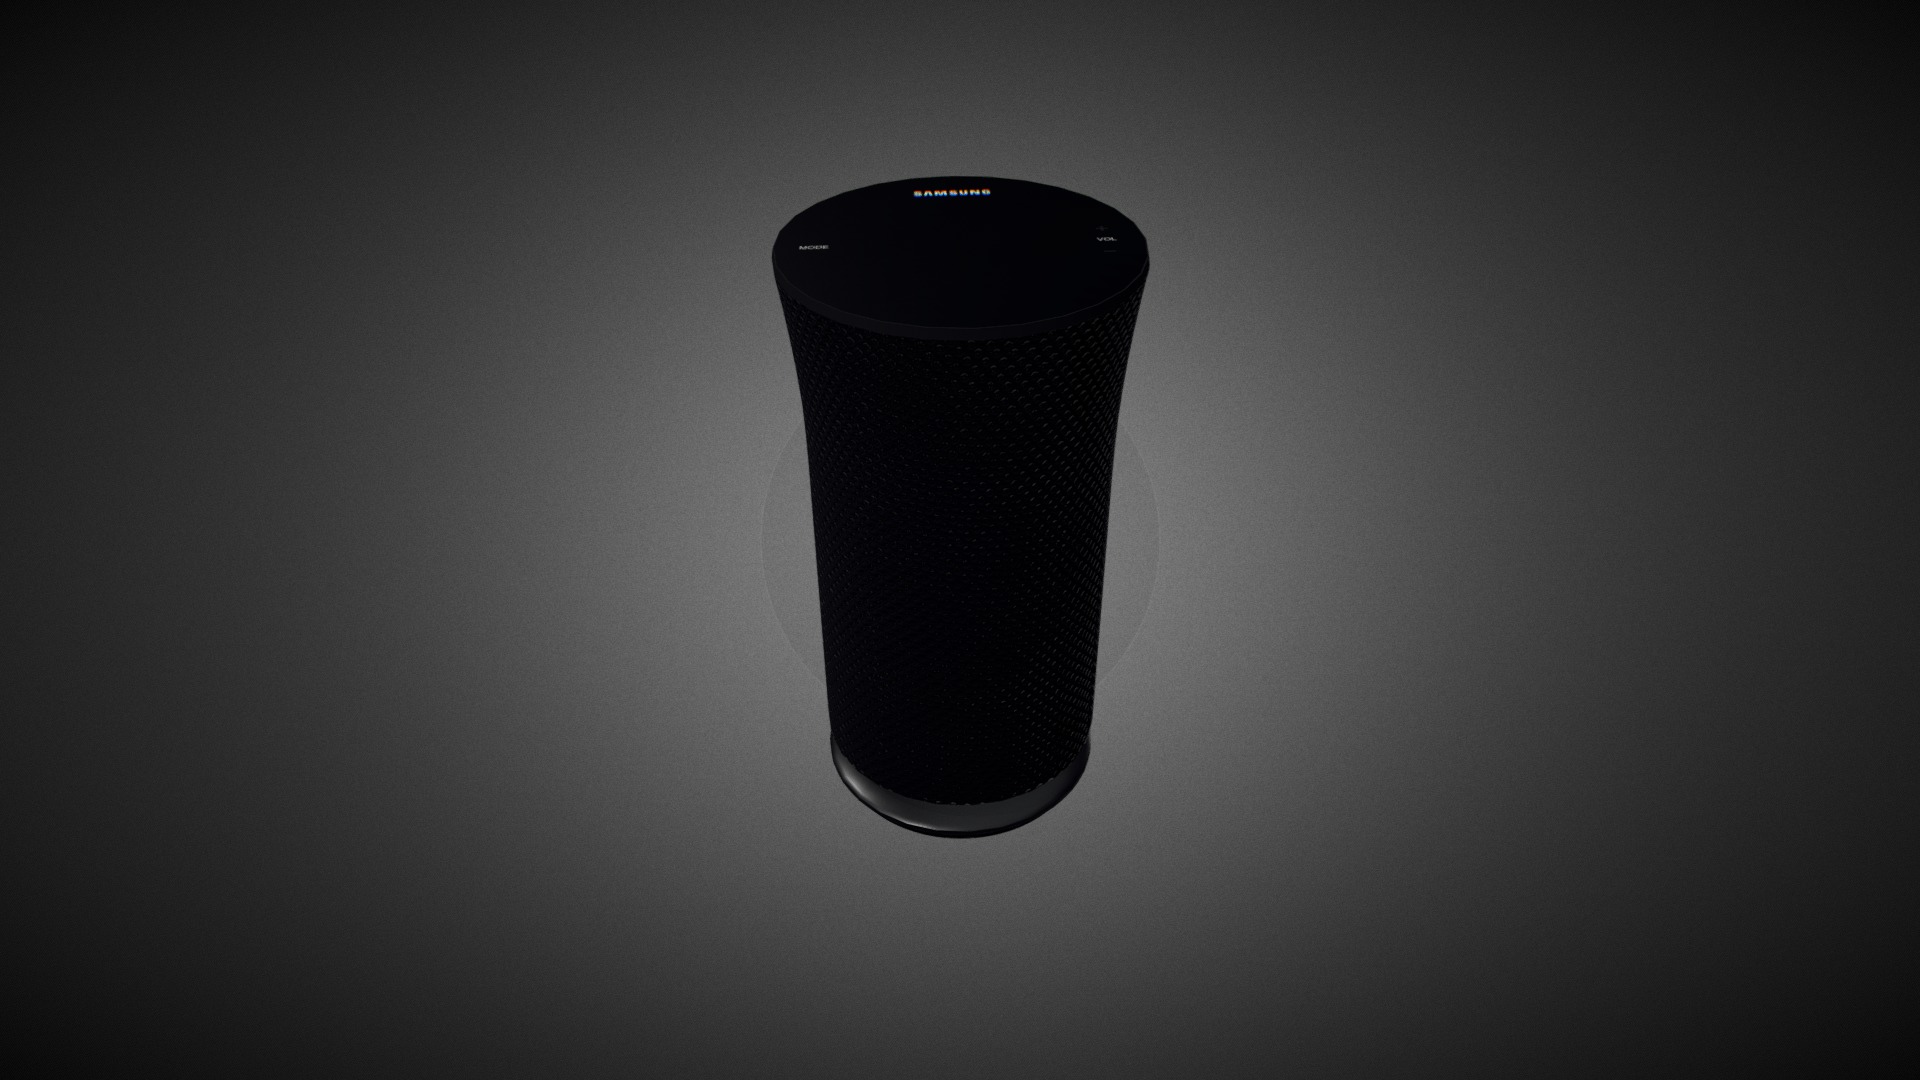 3D model Samsung Radiant360 R5 for Element 3D - This is a 3D model of the Samsung Radiant360 R5 for Element 3D. The 3D model is about a black cylindrical object.